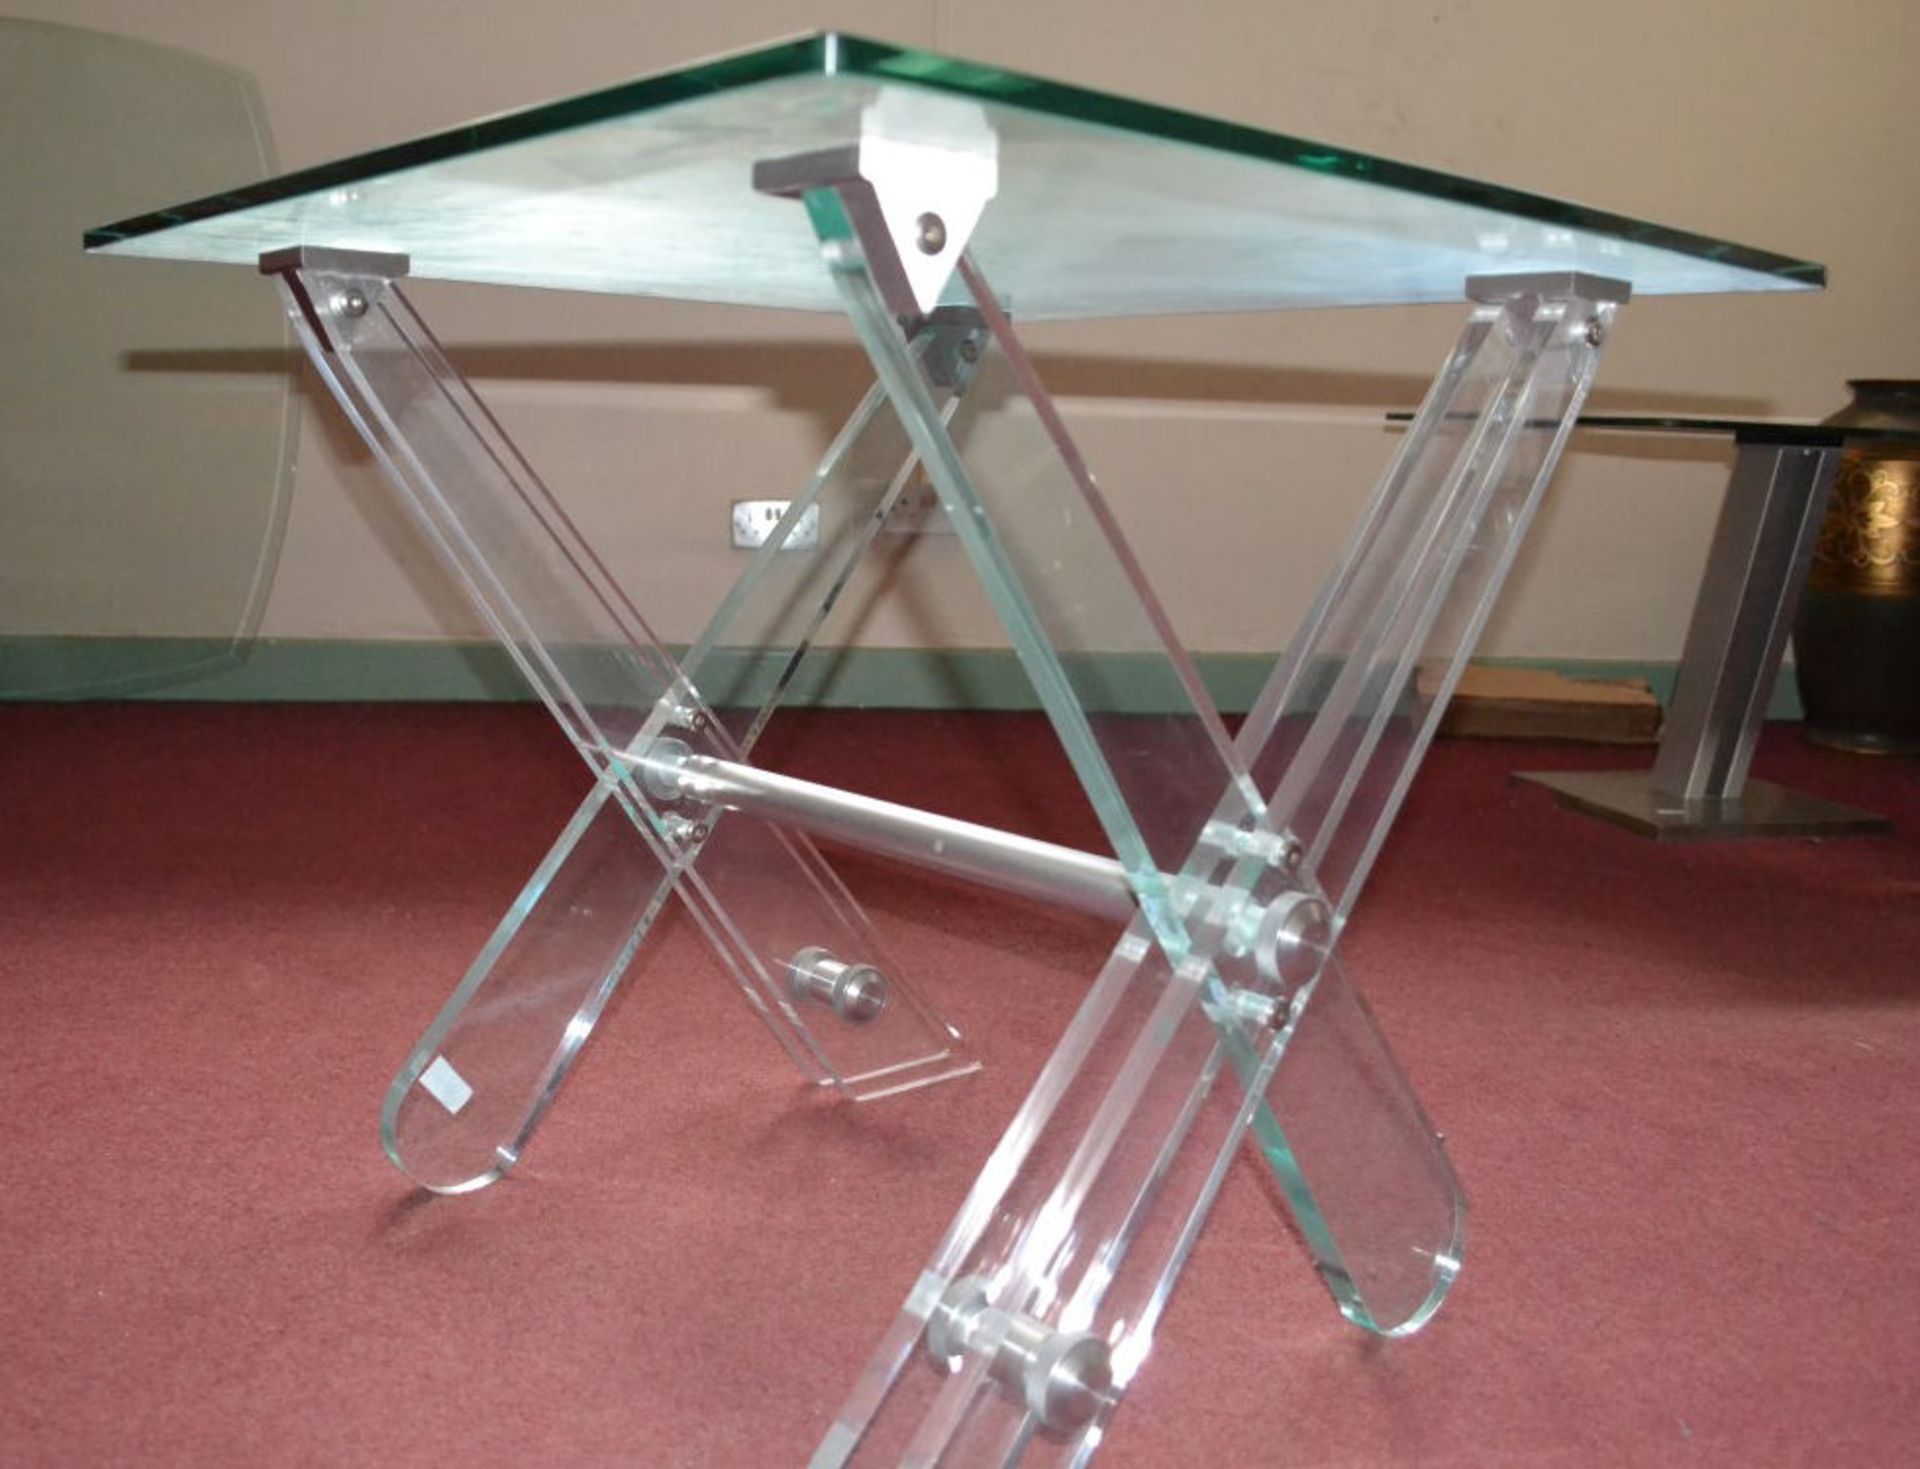 1 x Chelsom Kross Square Glass Lamp Table - Image 5 of 5